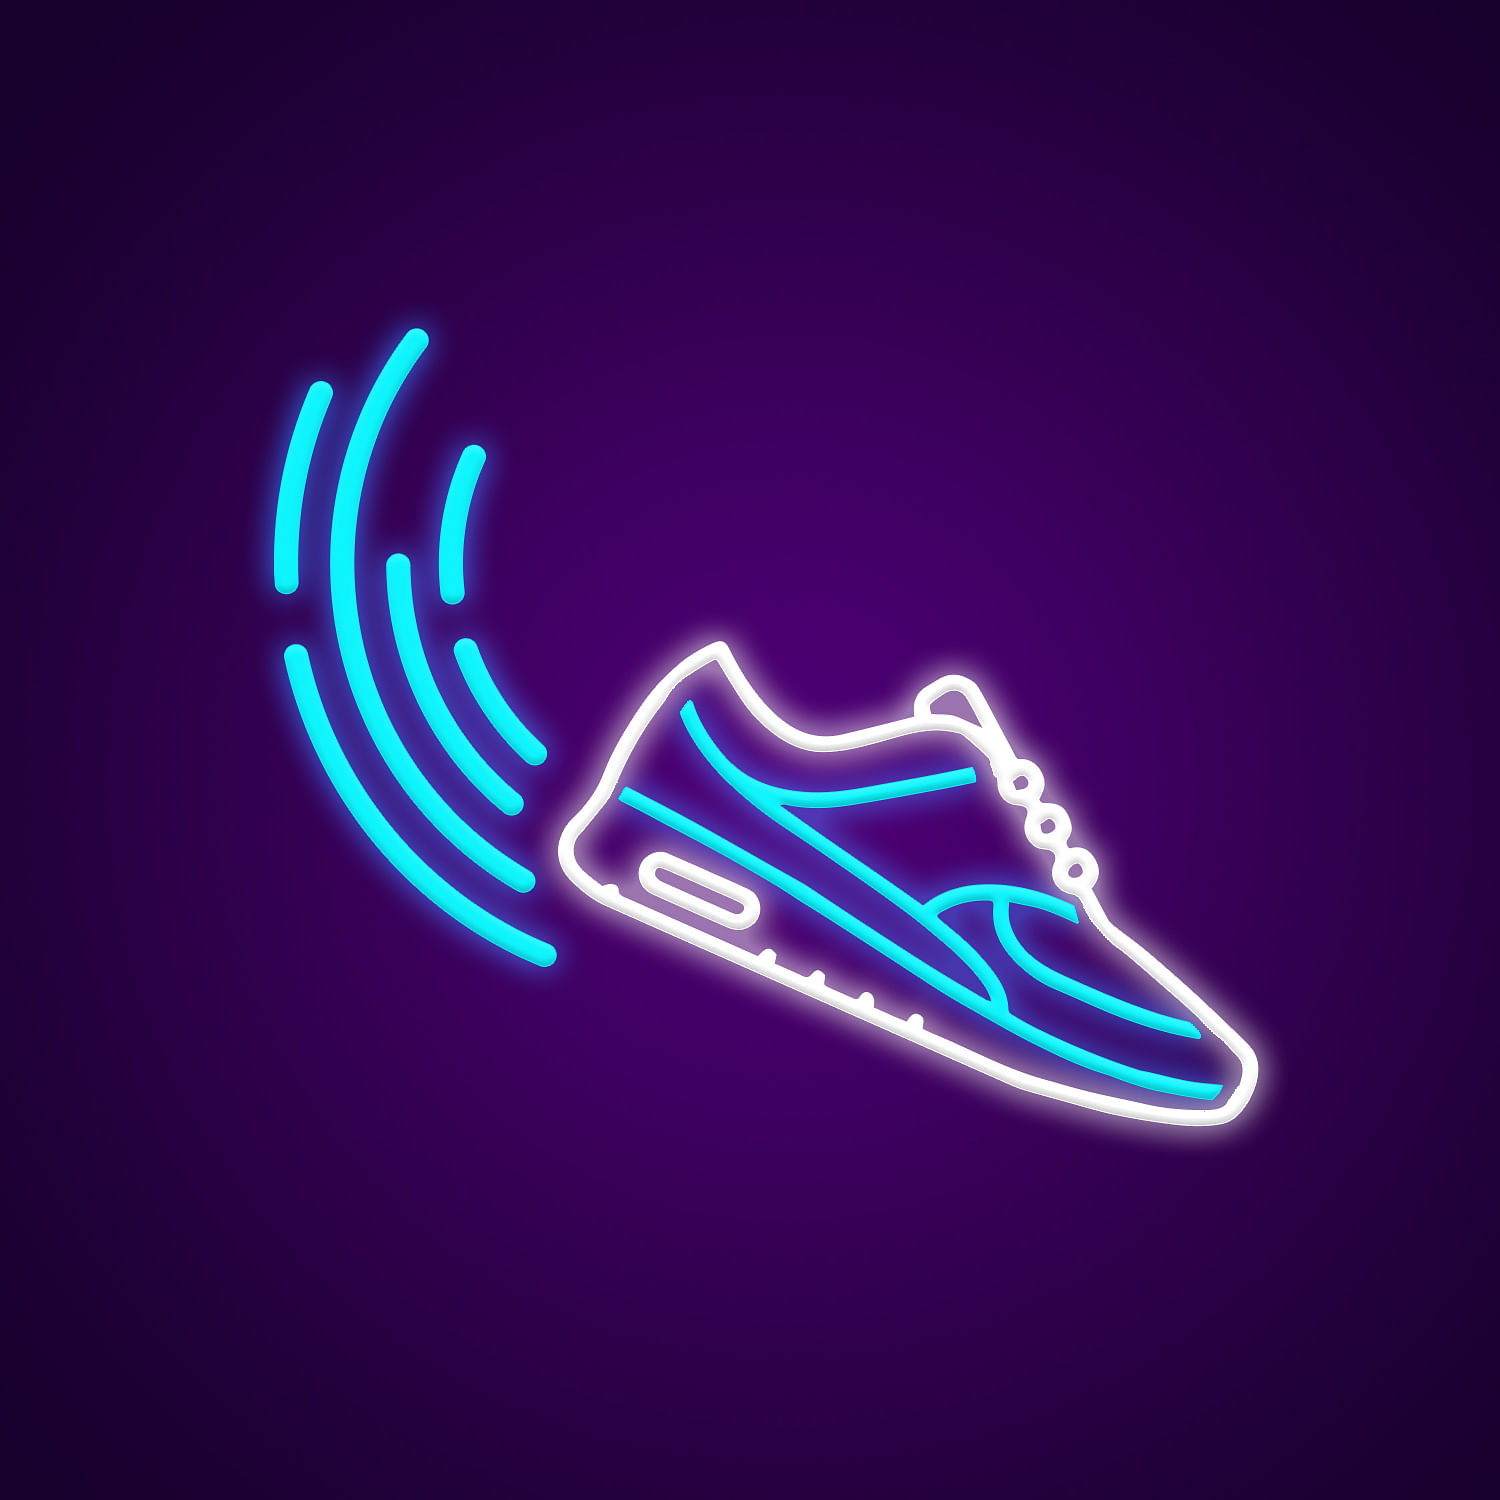 Sneaker Neon Light Shoes Neon LED Sign Neonize